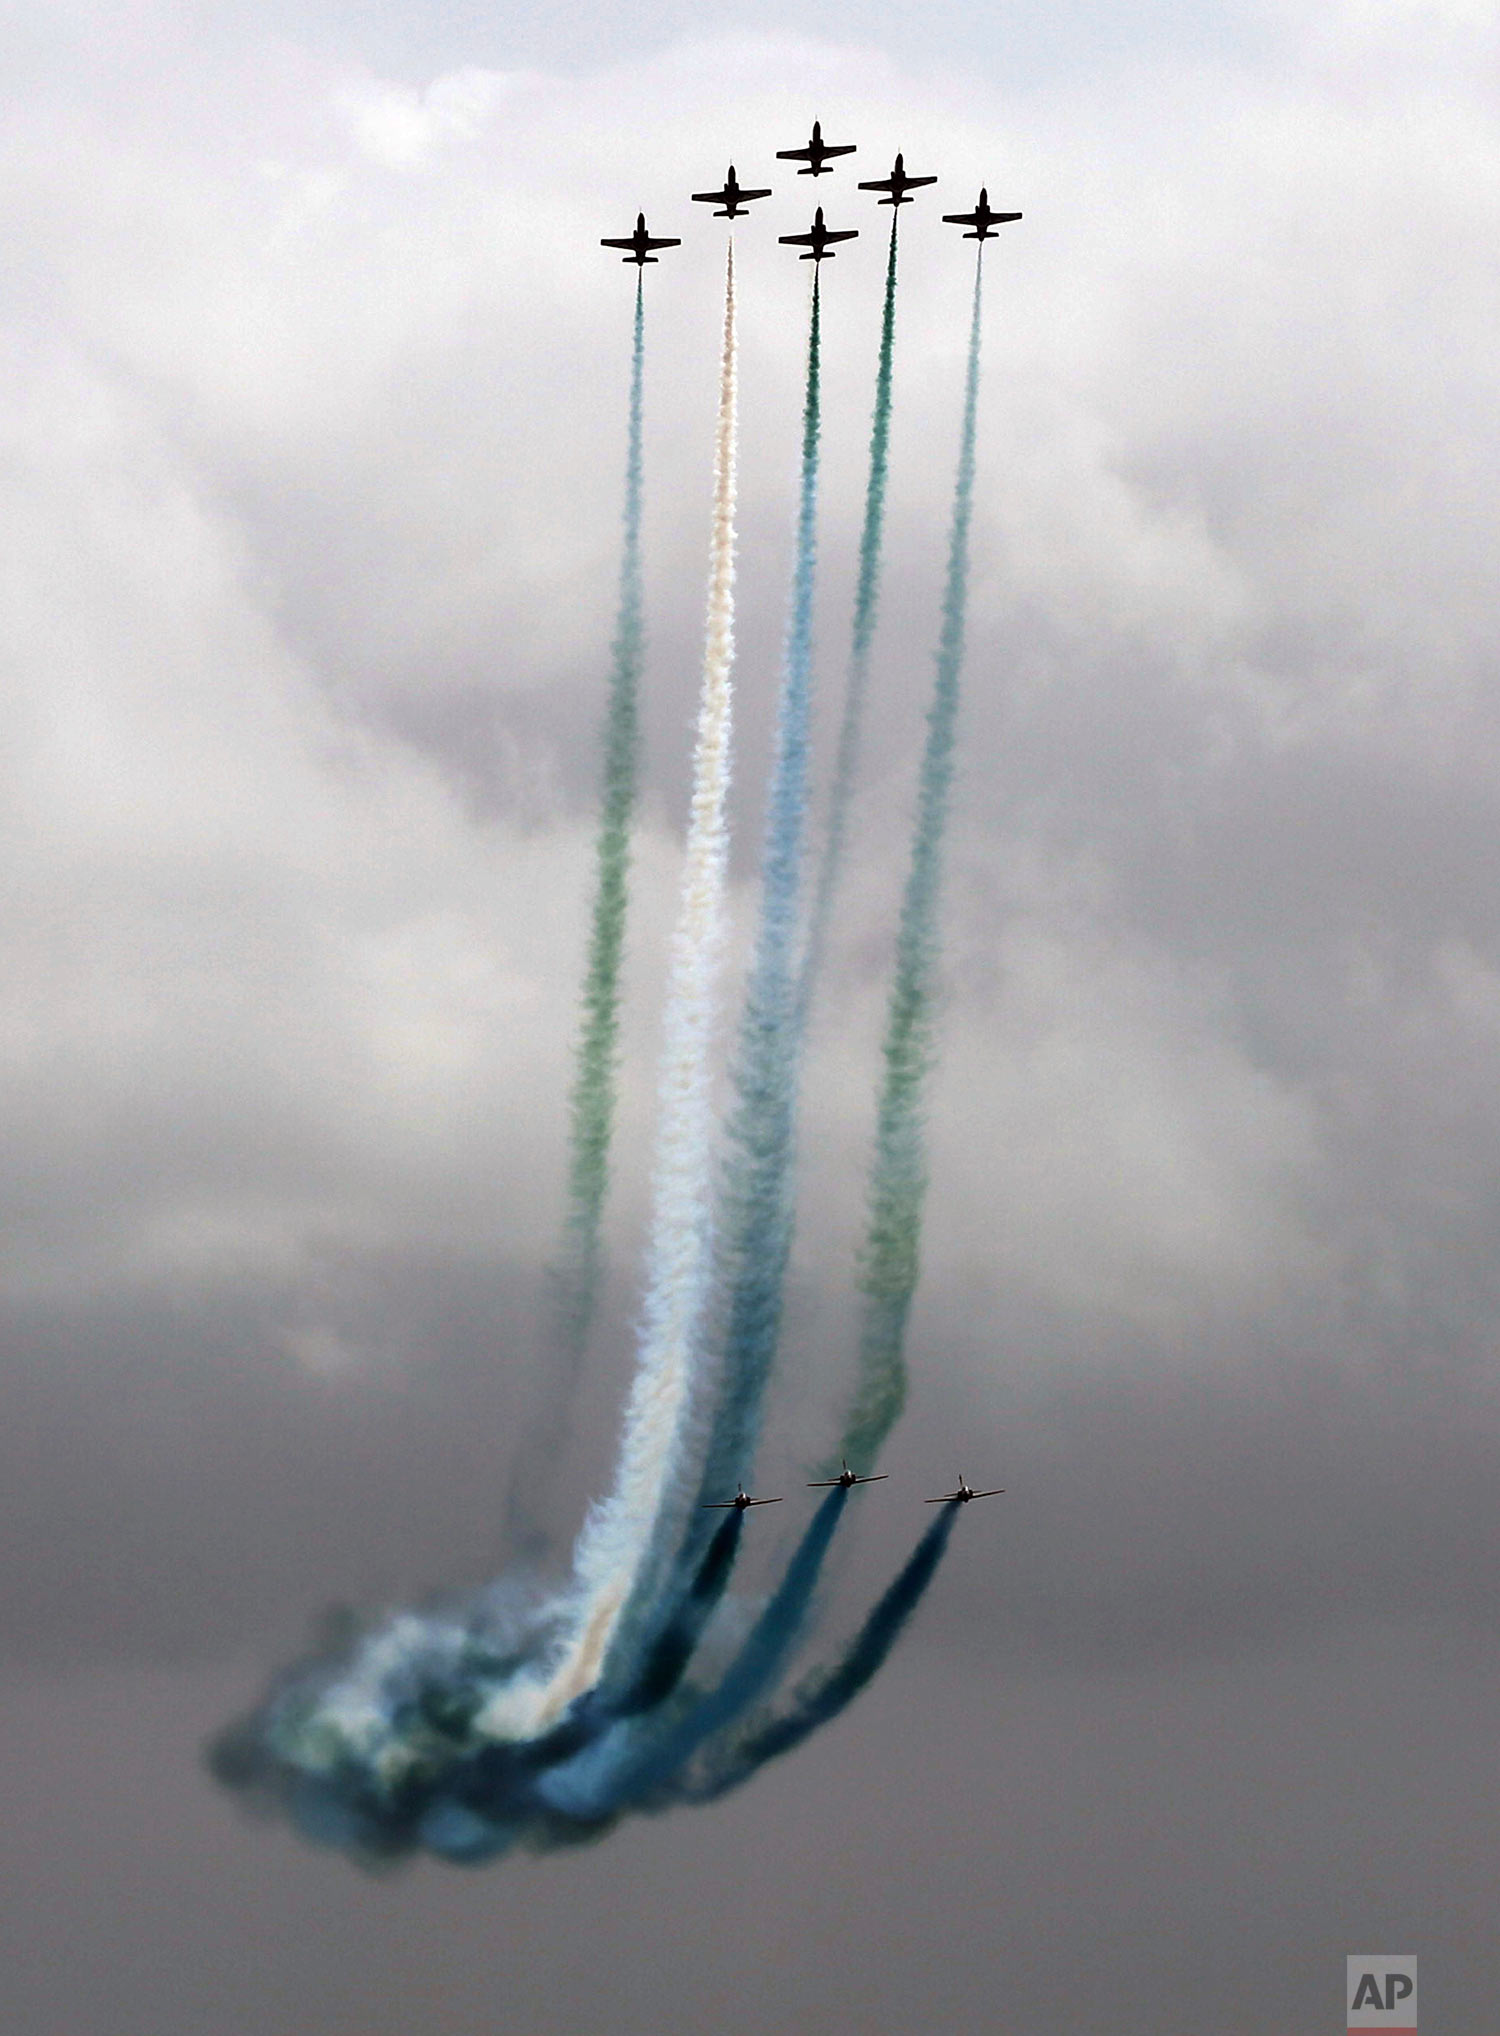  Pakistani Air Force fighter jets perform an aerobatic stunt during an air show to mark Pakistan's Independence Day in Karachi, Pakistan, Monday, Aug. 14, 2017. Pakistanis commemorated its independence from British colonial rule in 1947. (AP Photo/Sh